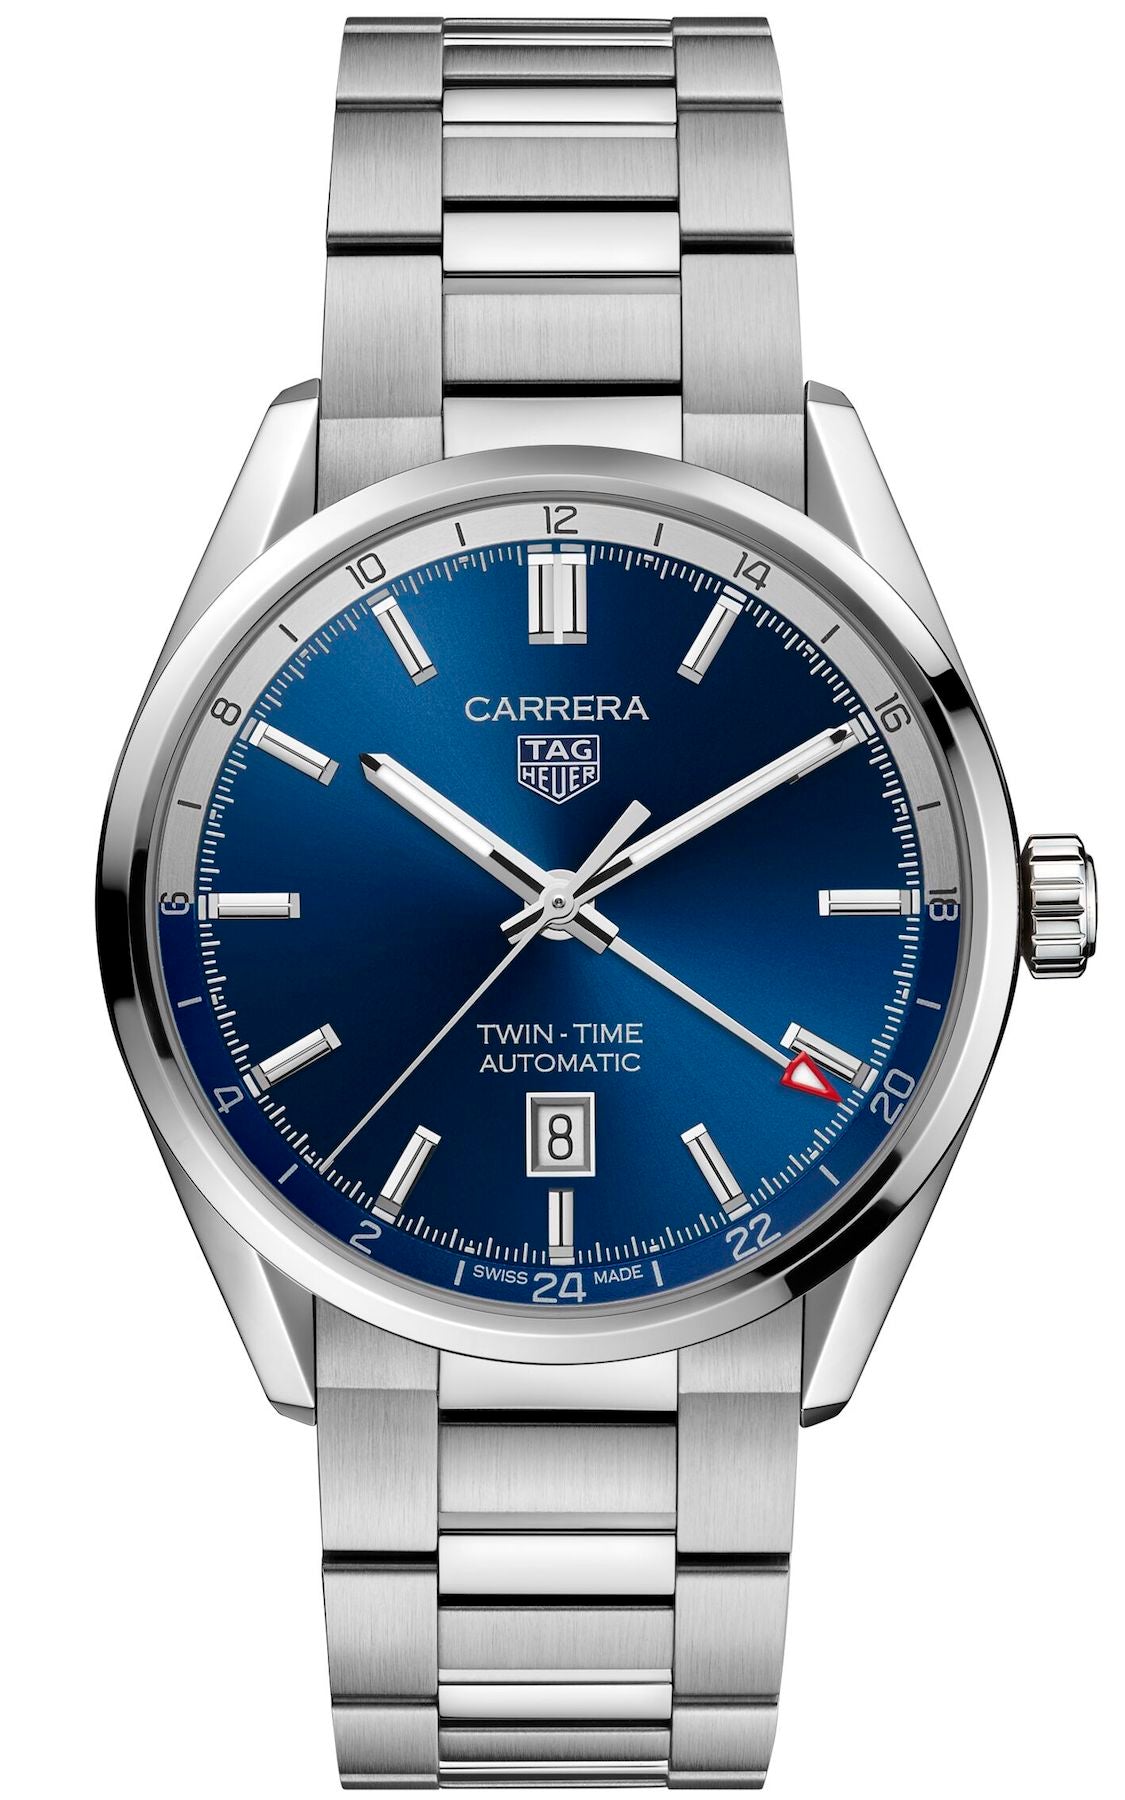 Photos - Wrist Watch TAG Heuer Watch Carrera Calibre 7 Twin Time Automatic Mens - Blue TAG-2336 